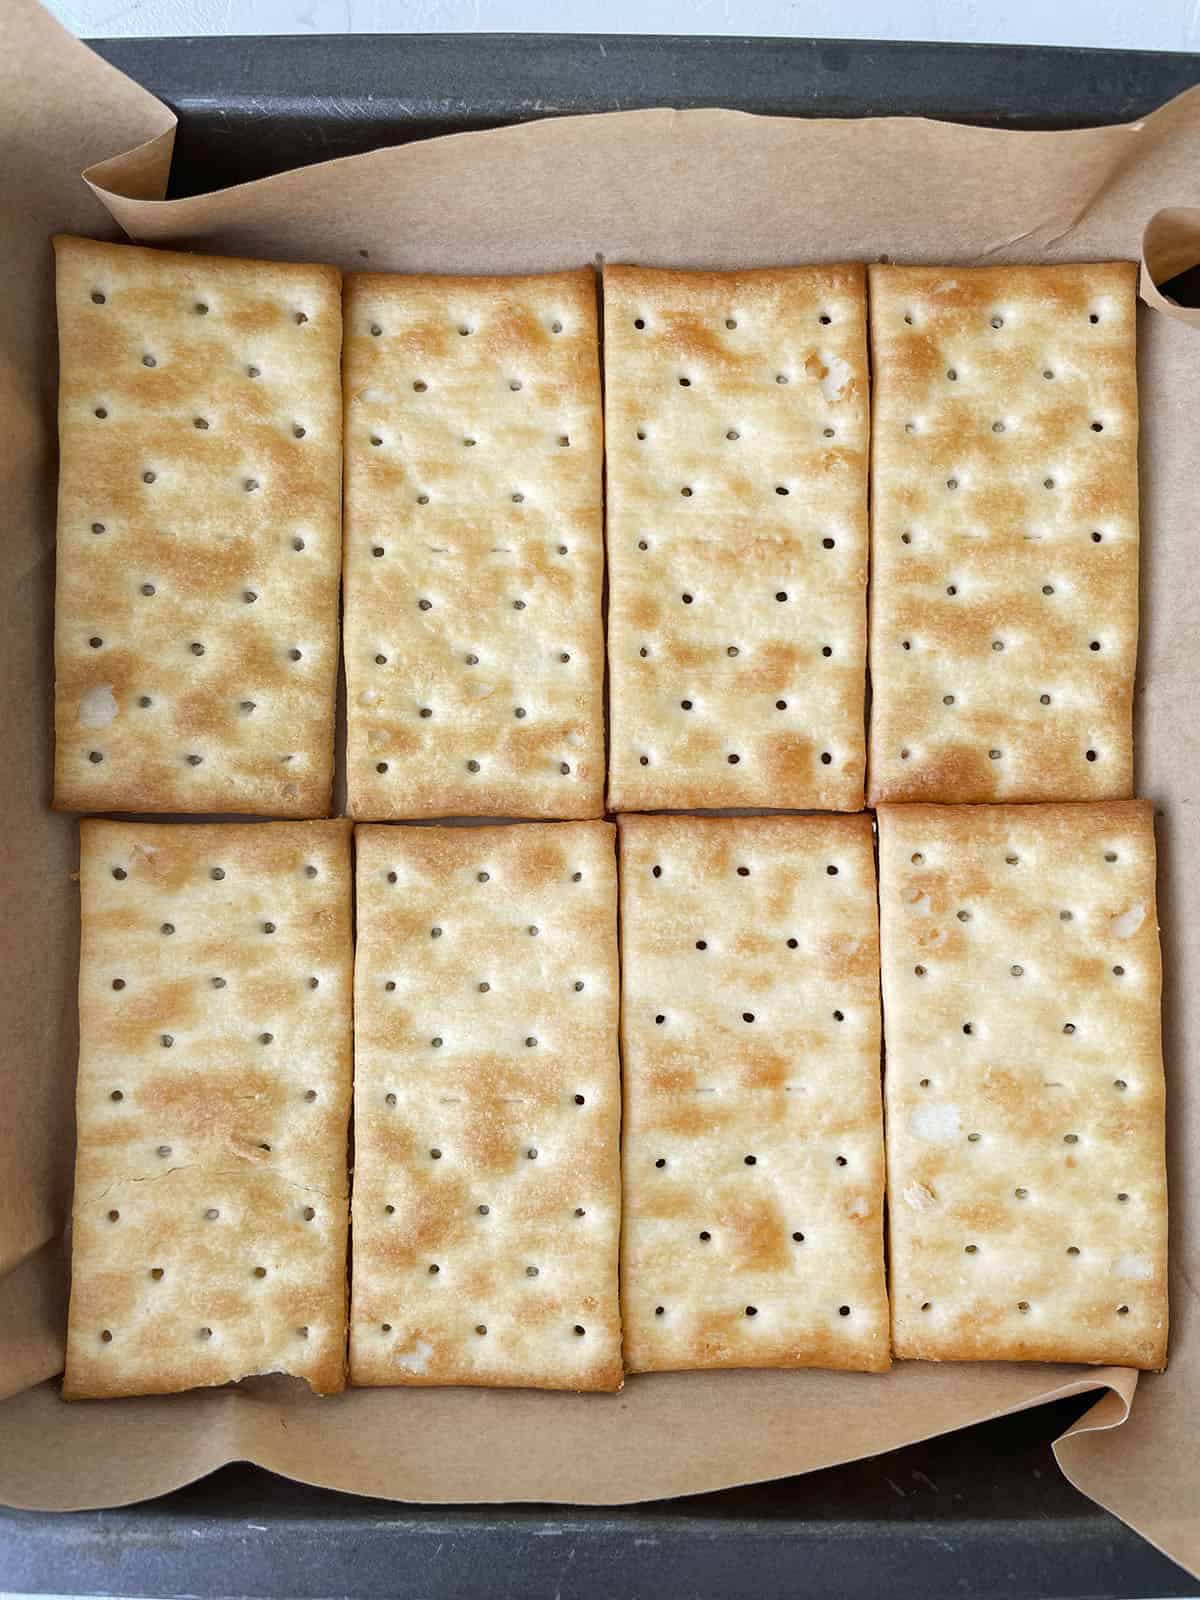 8 crackers in a baking pan with parchment paper.